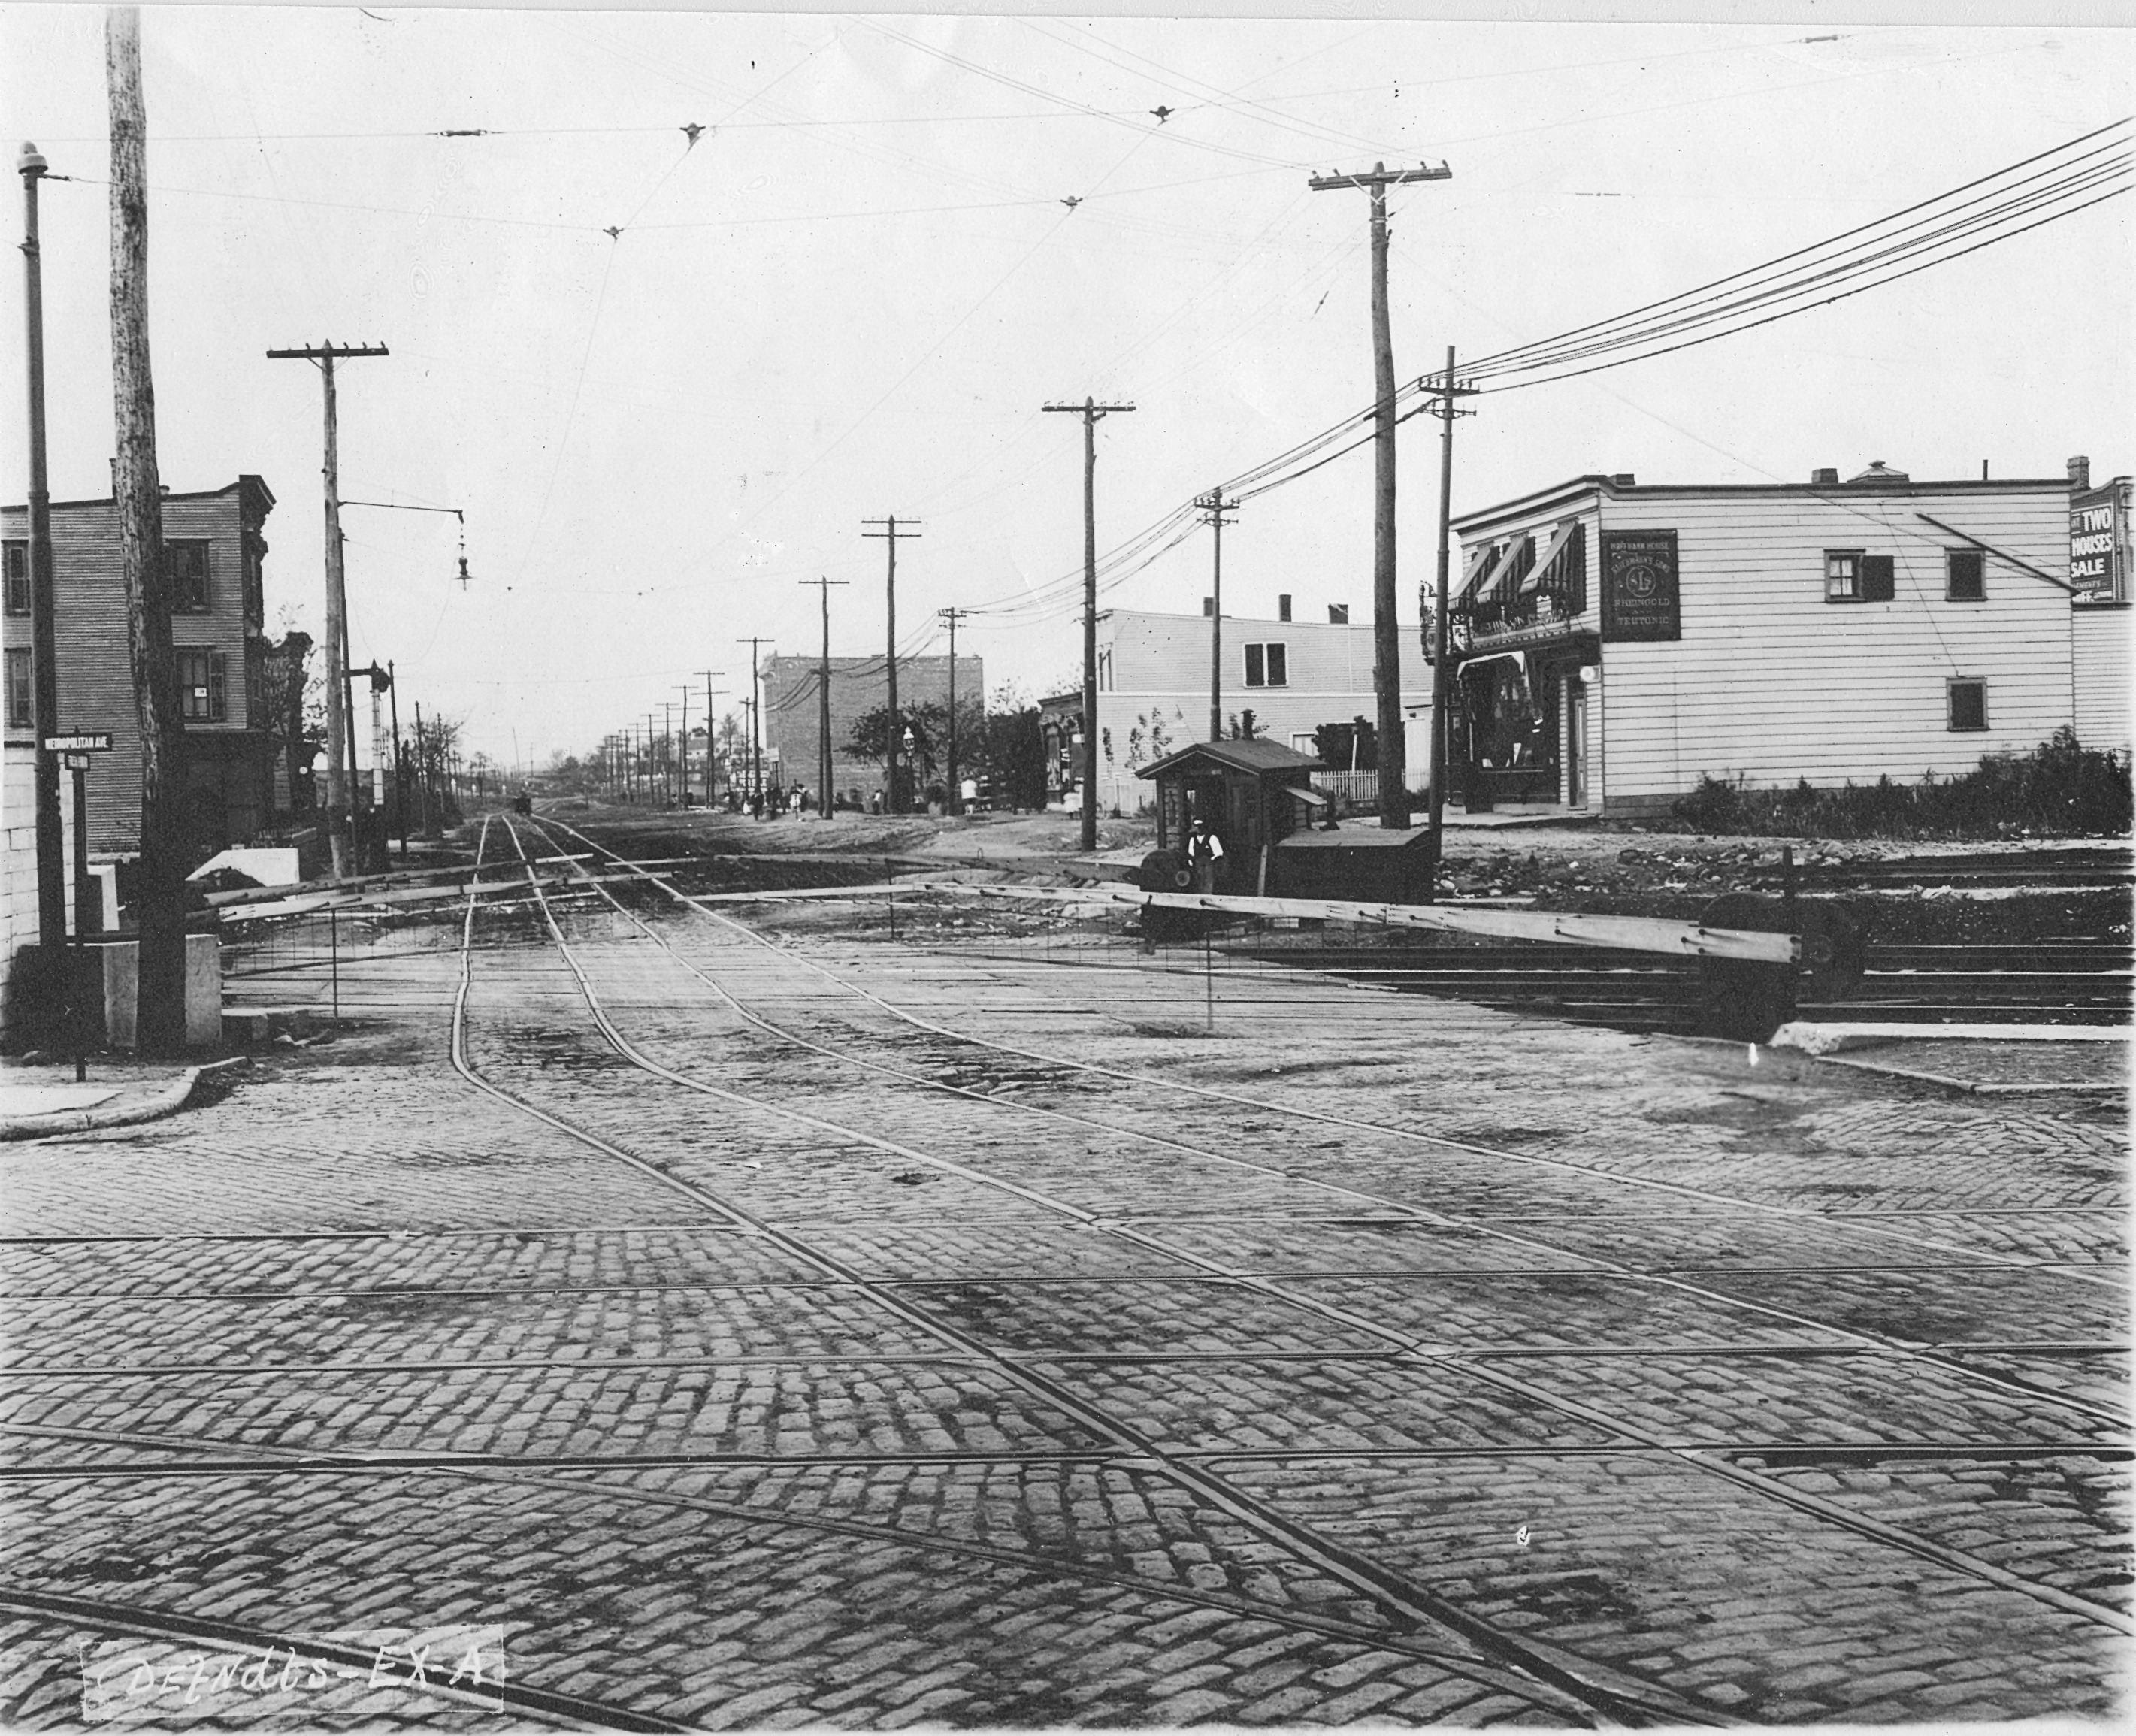 The cobblestoned intersection of Fresh Pond Road and Metropolitan Avenue in this early 20th-century photo.